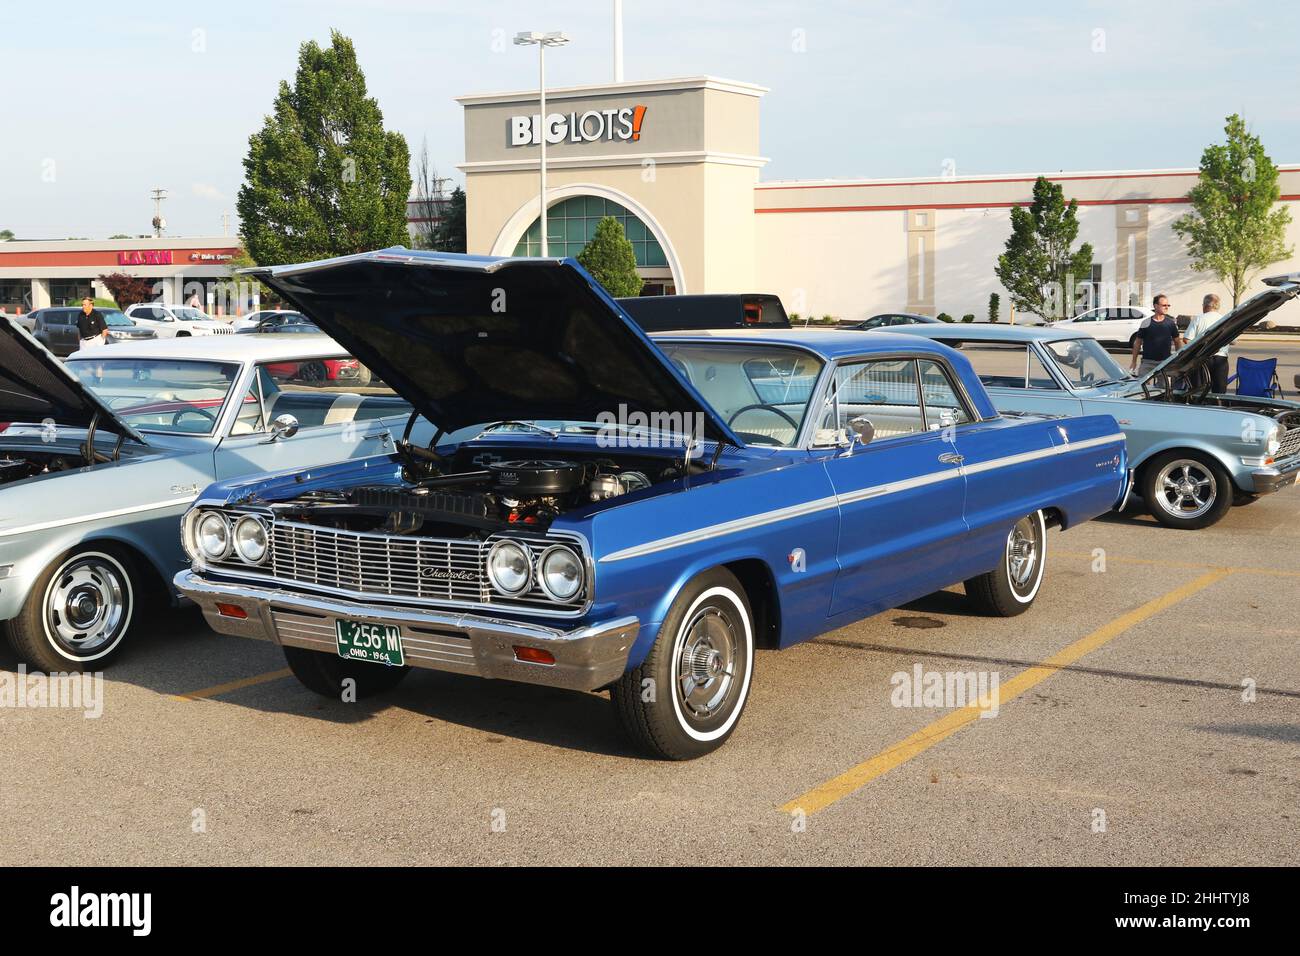 Auto- 1964 Chevrolet Impala. Blue. Car at Kettering Saturday night cruise-in. Dorothy Lane and Woodman Drive, Kettering Towne Center, Kettering, Dayto Stock Photo